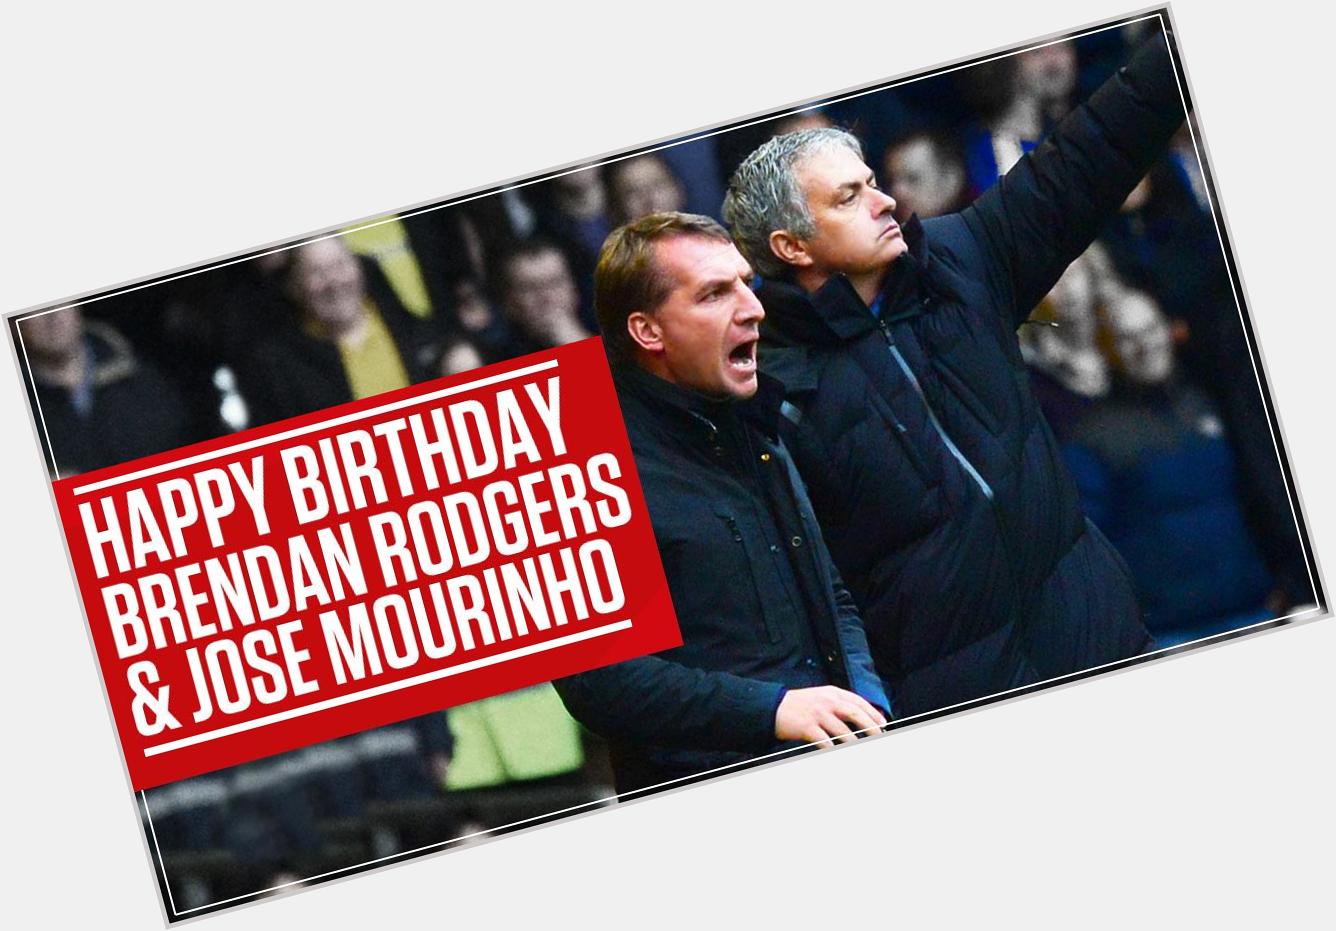 The master and the pupil. Happy Birthday to Jose Mourinho and Brendan Rodgers...  